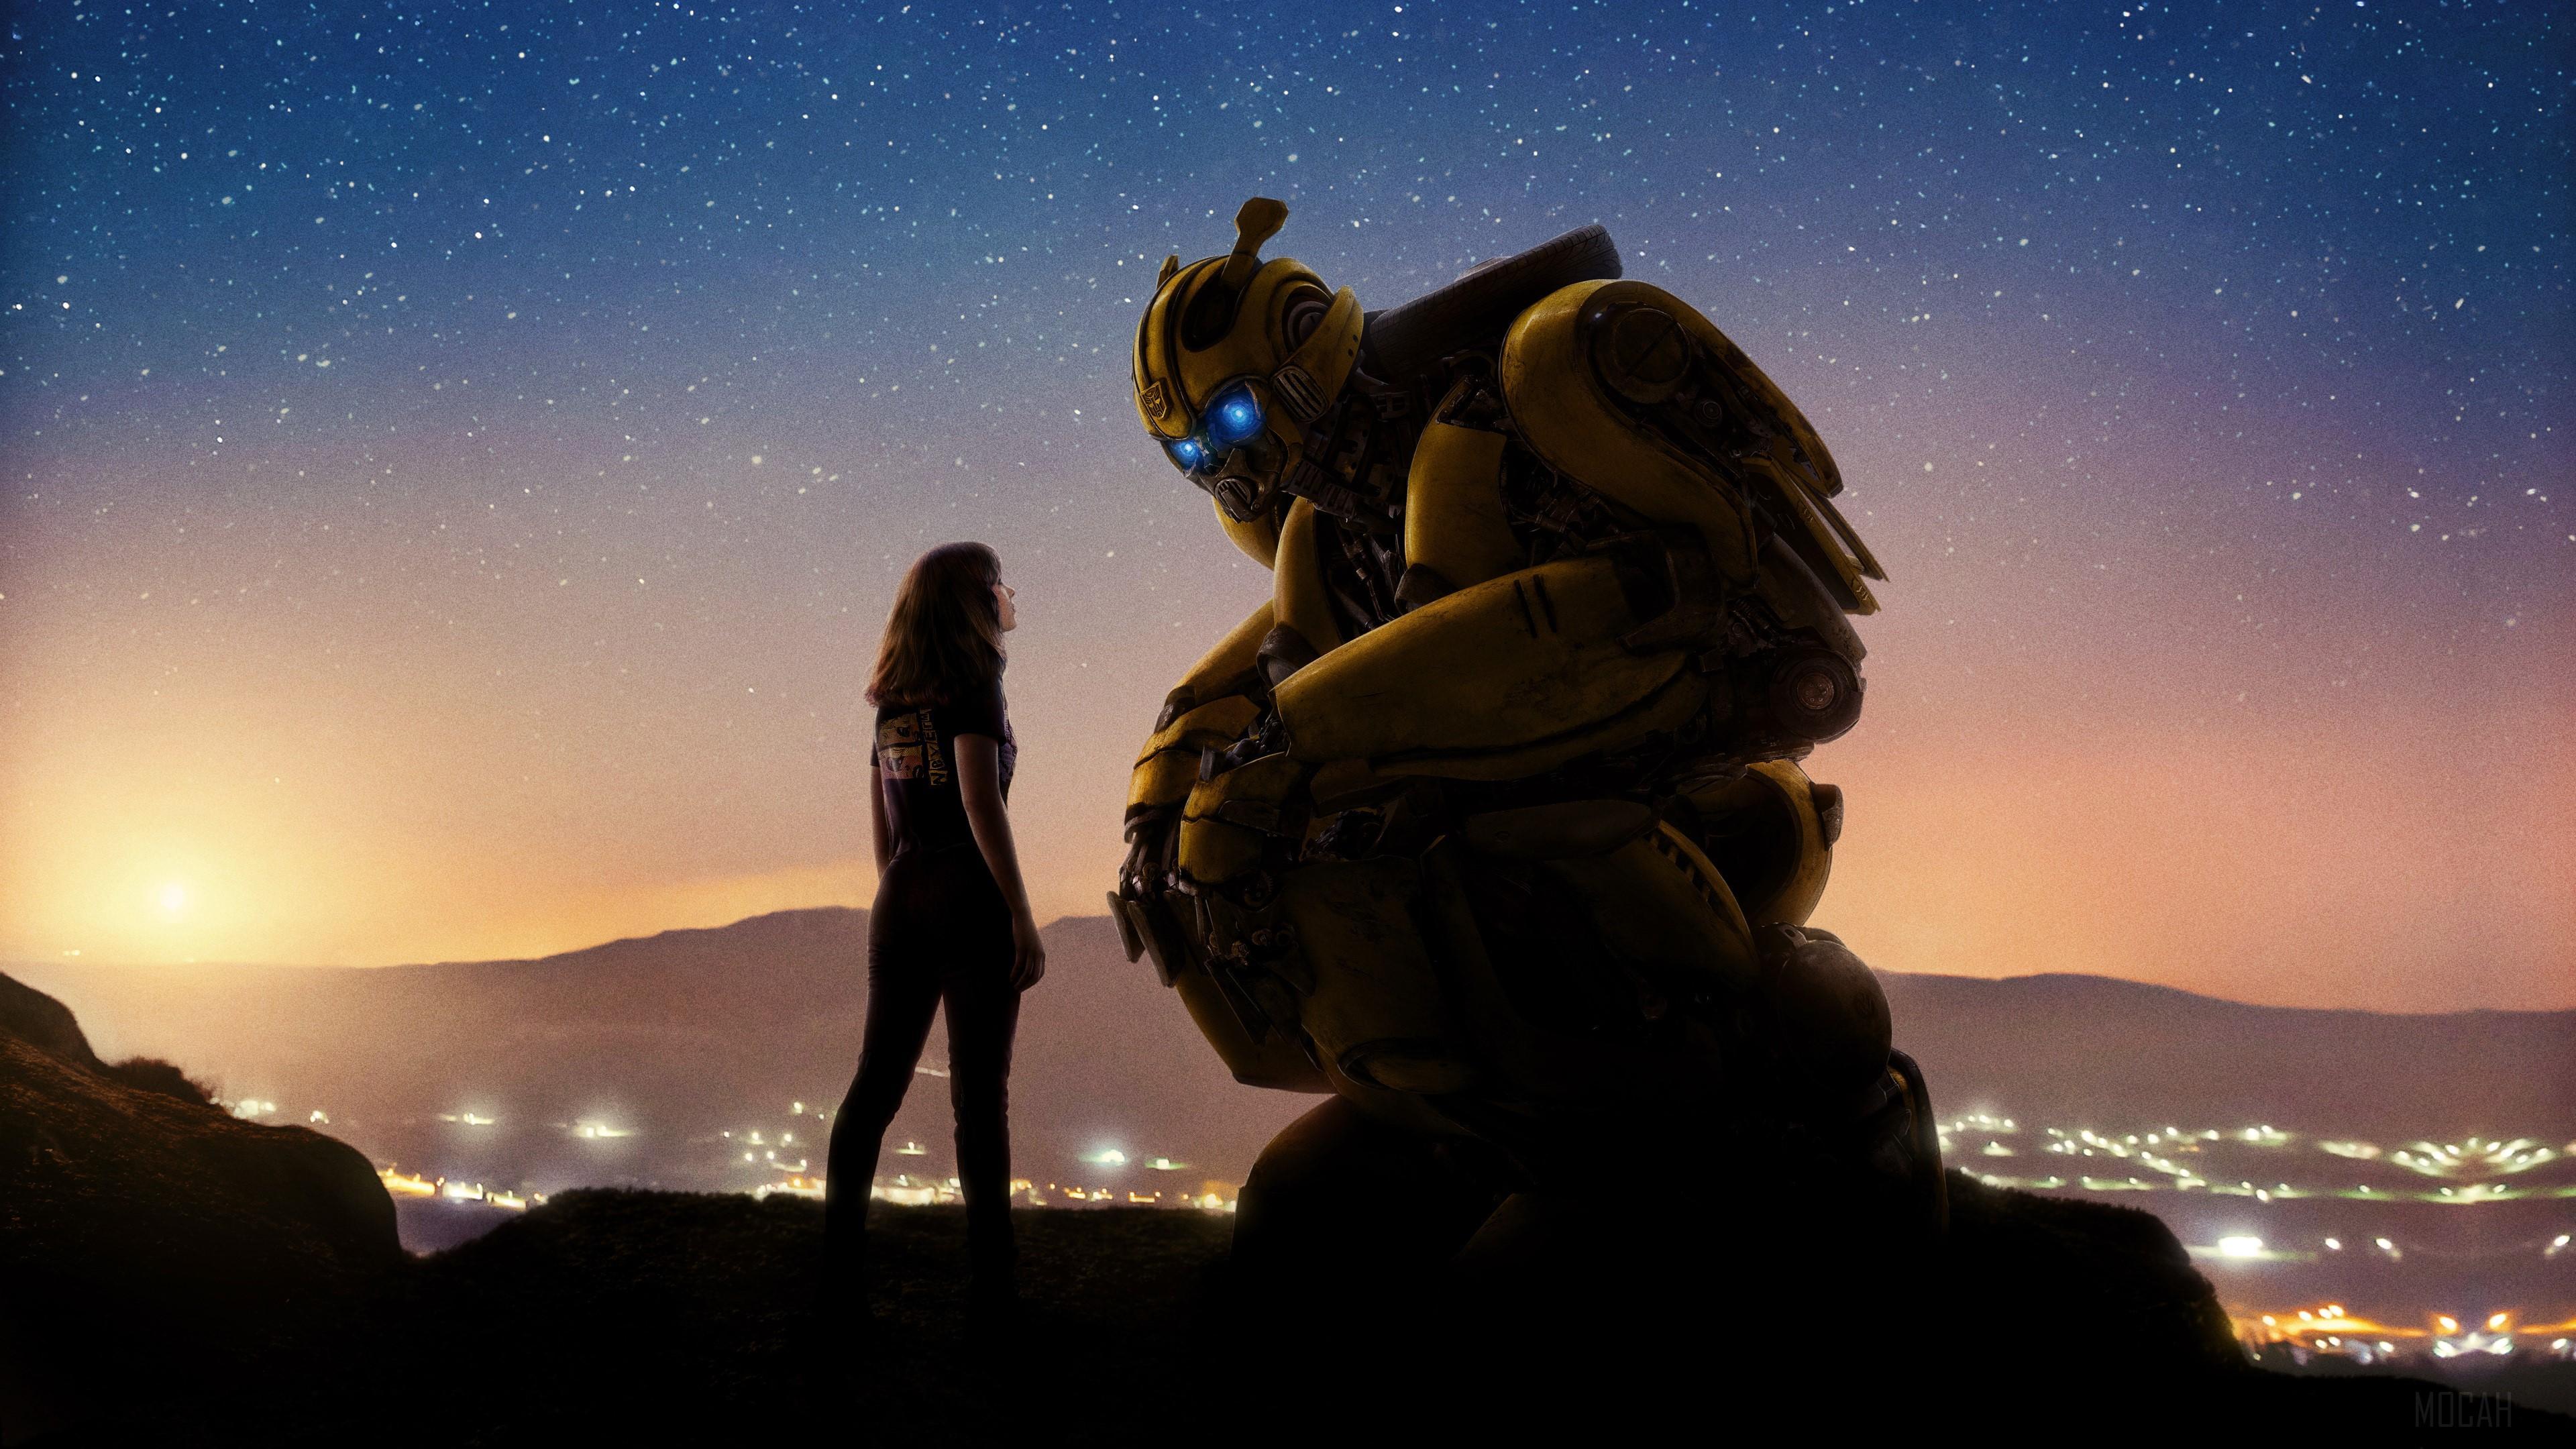 HD wallpaper, Bumblebee Movie 2018 Cool New Poster 4K